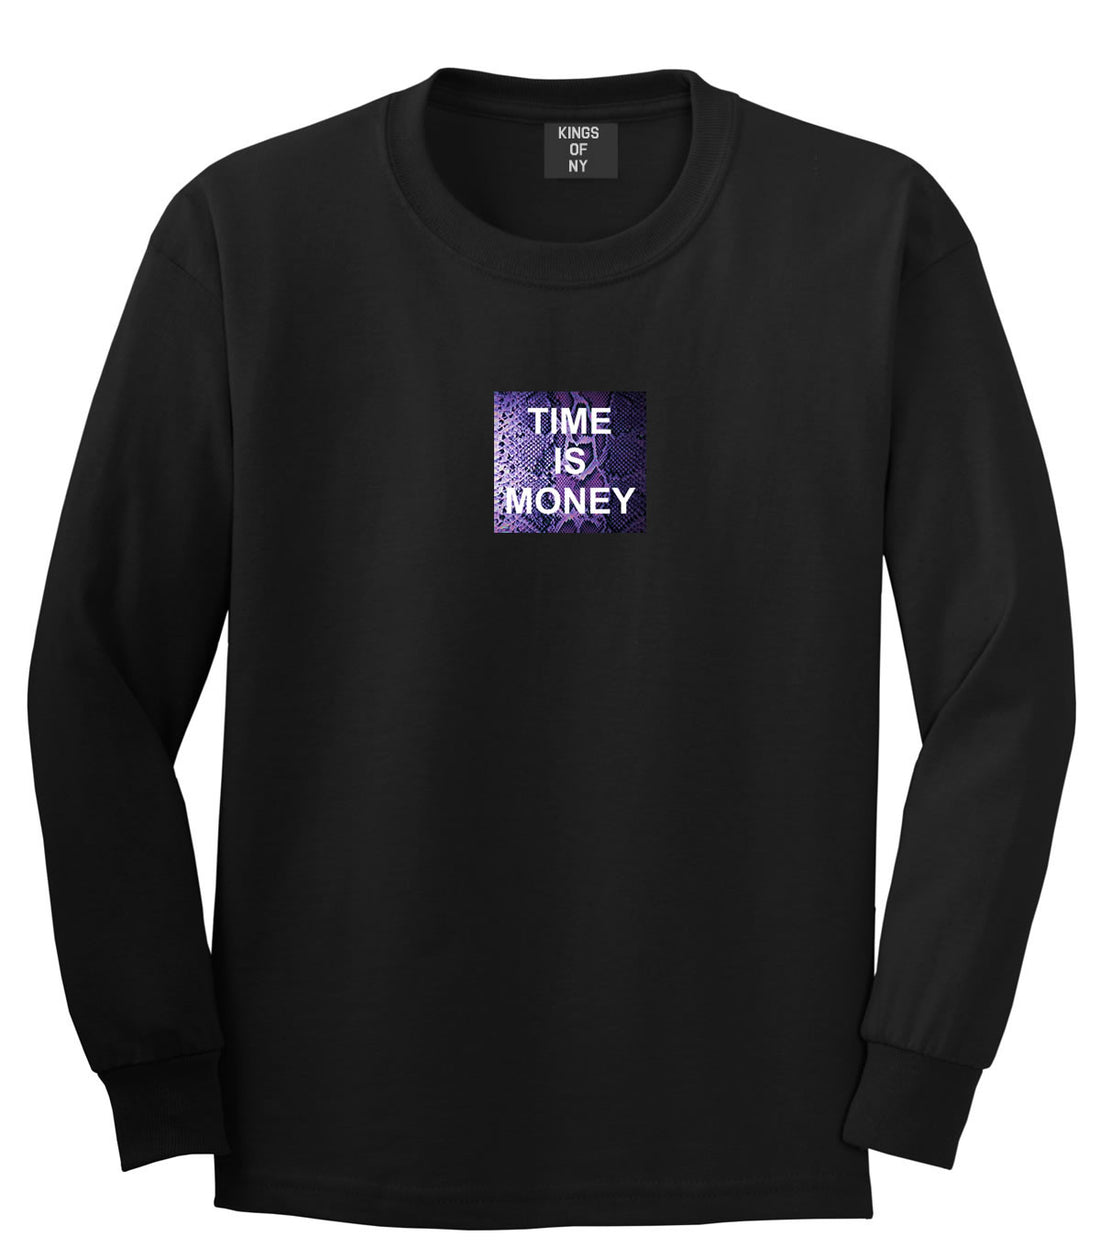 Time Is Money Snakesin Print Long Sleeve T-Shirt in Black By Kings Of NY